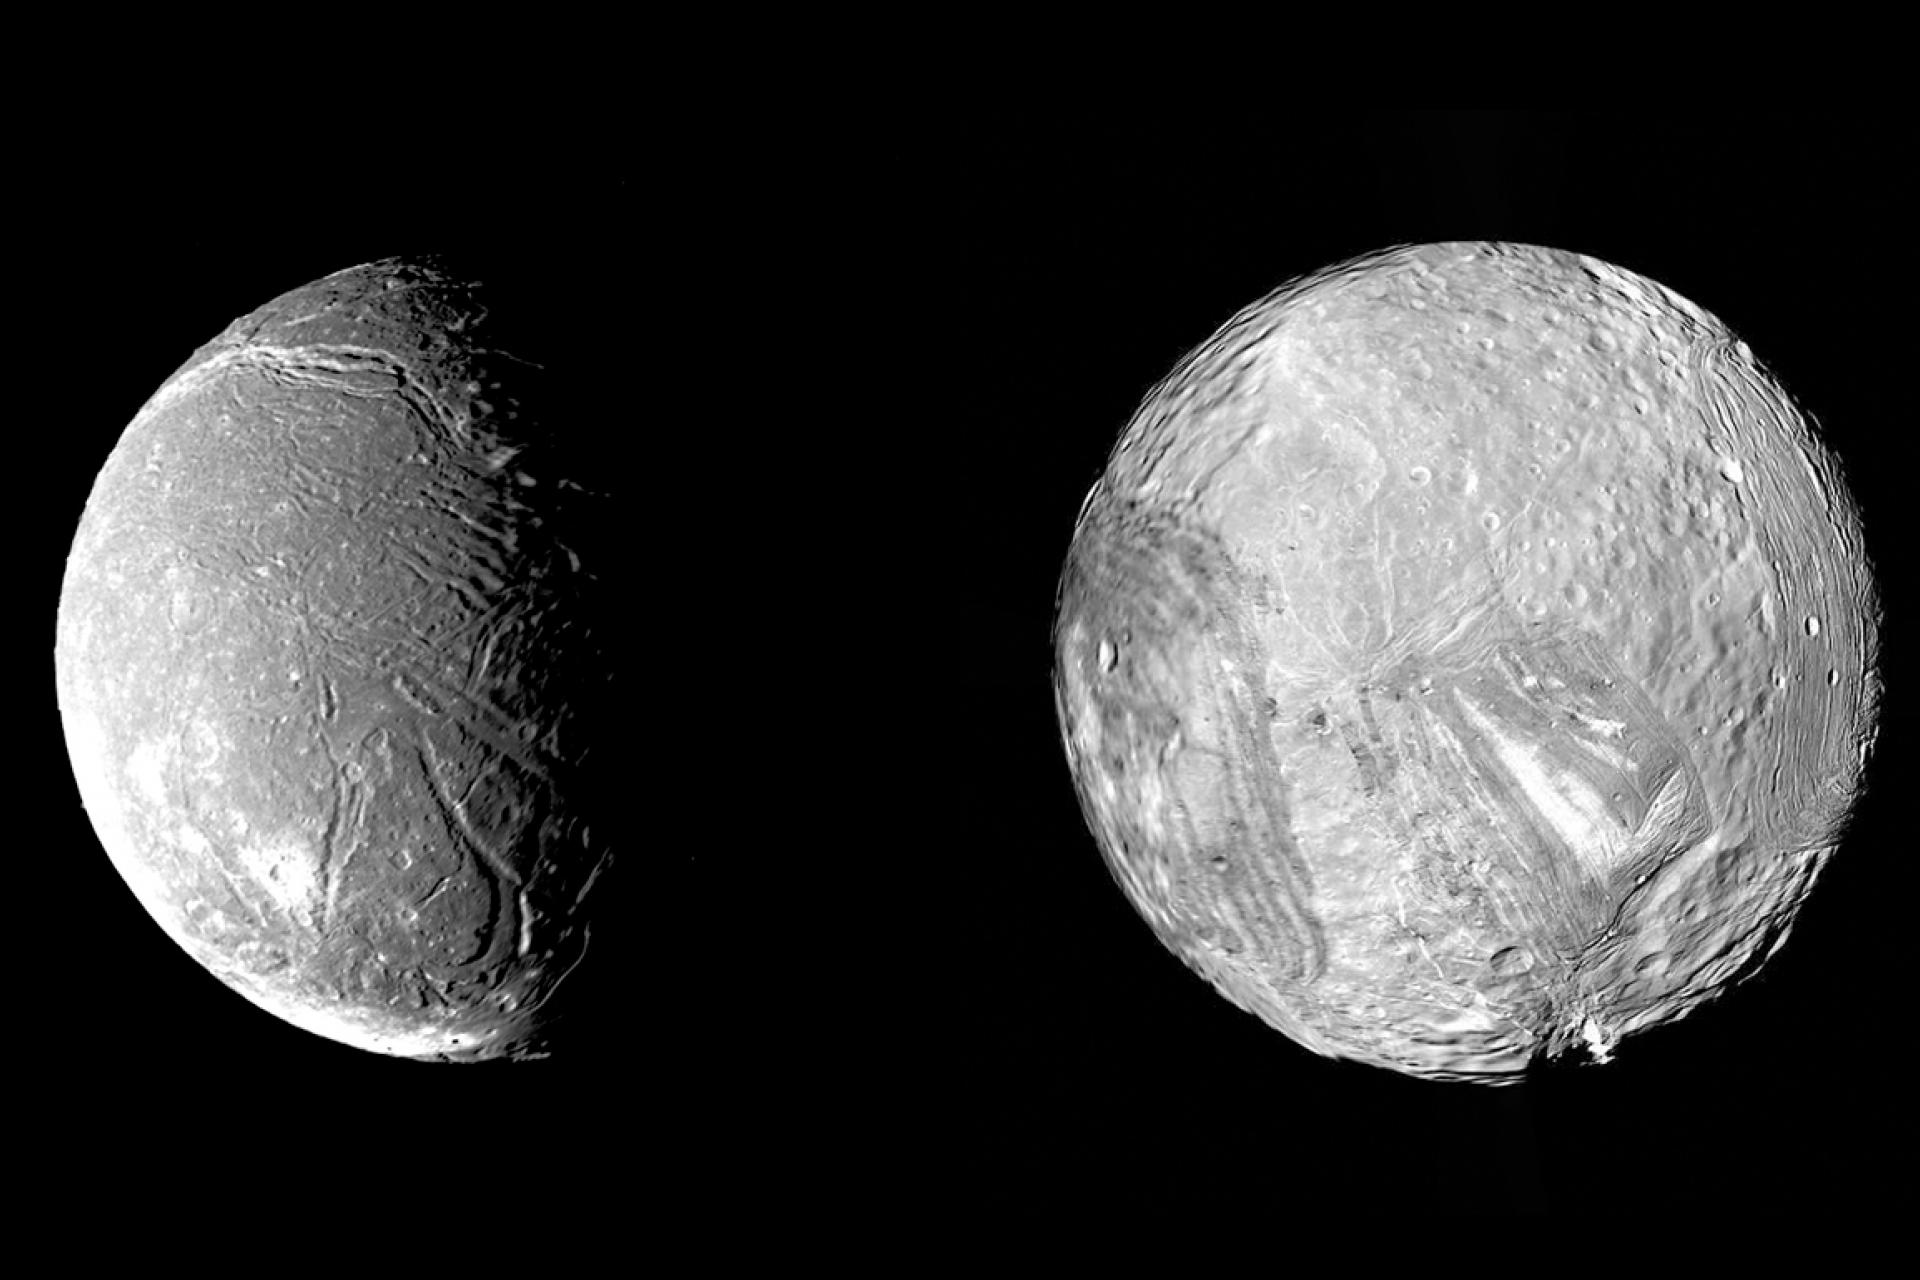 Composite of two Voyager 2 images of Uranus' moons Ariel on the left (only half of it lit from the left) and Miranda on the right